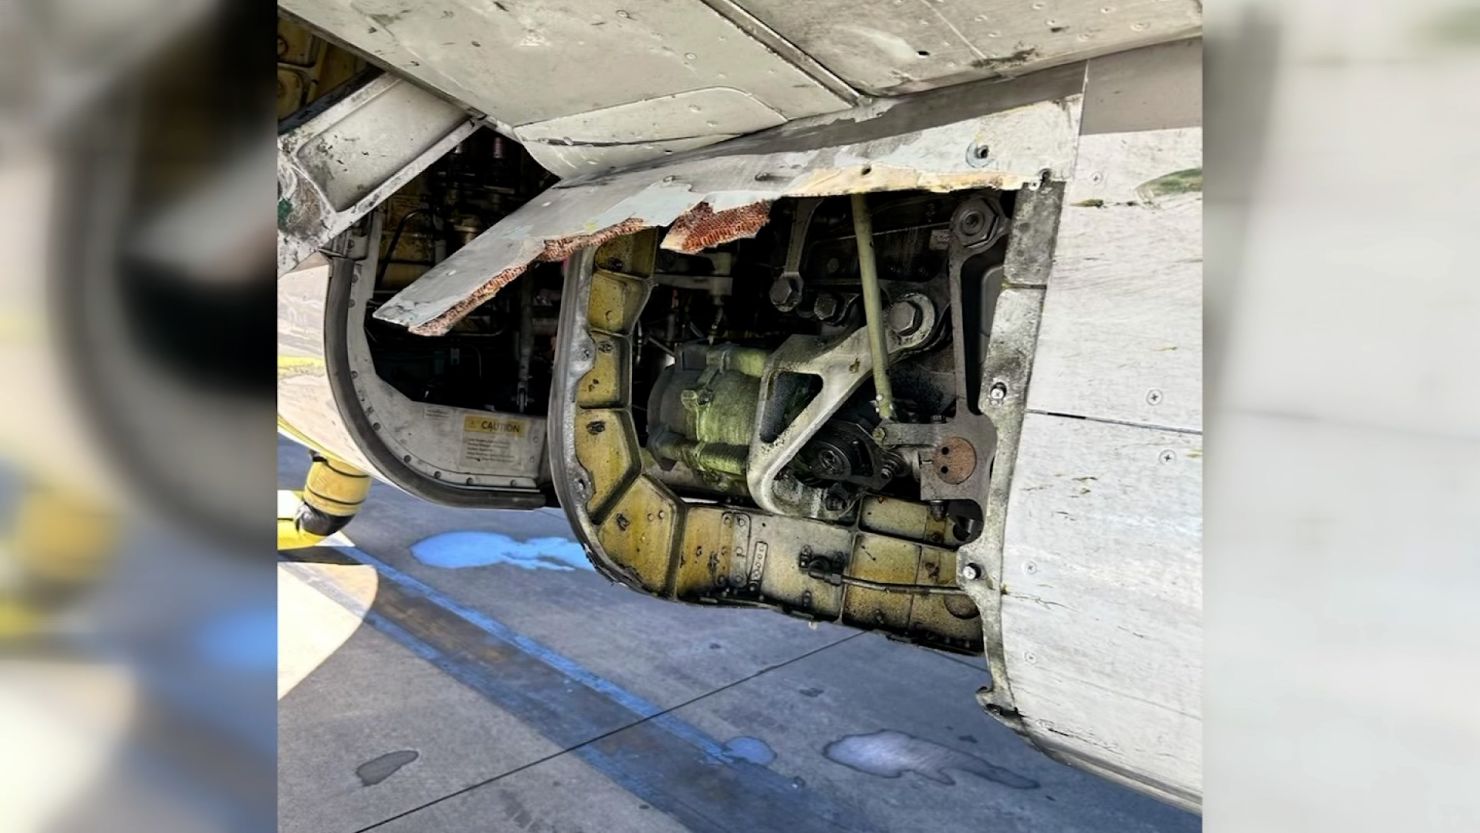 A missing panel from a Boeing jet flown by United Airlines from San Francisco to Medford Oregon on Friday.